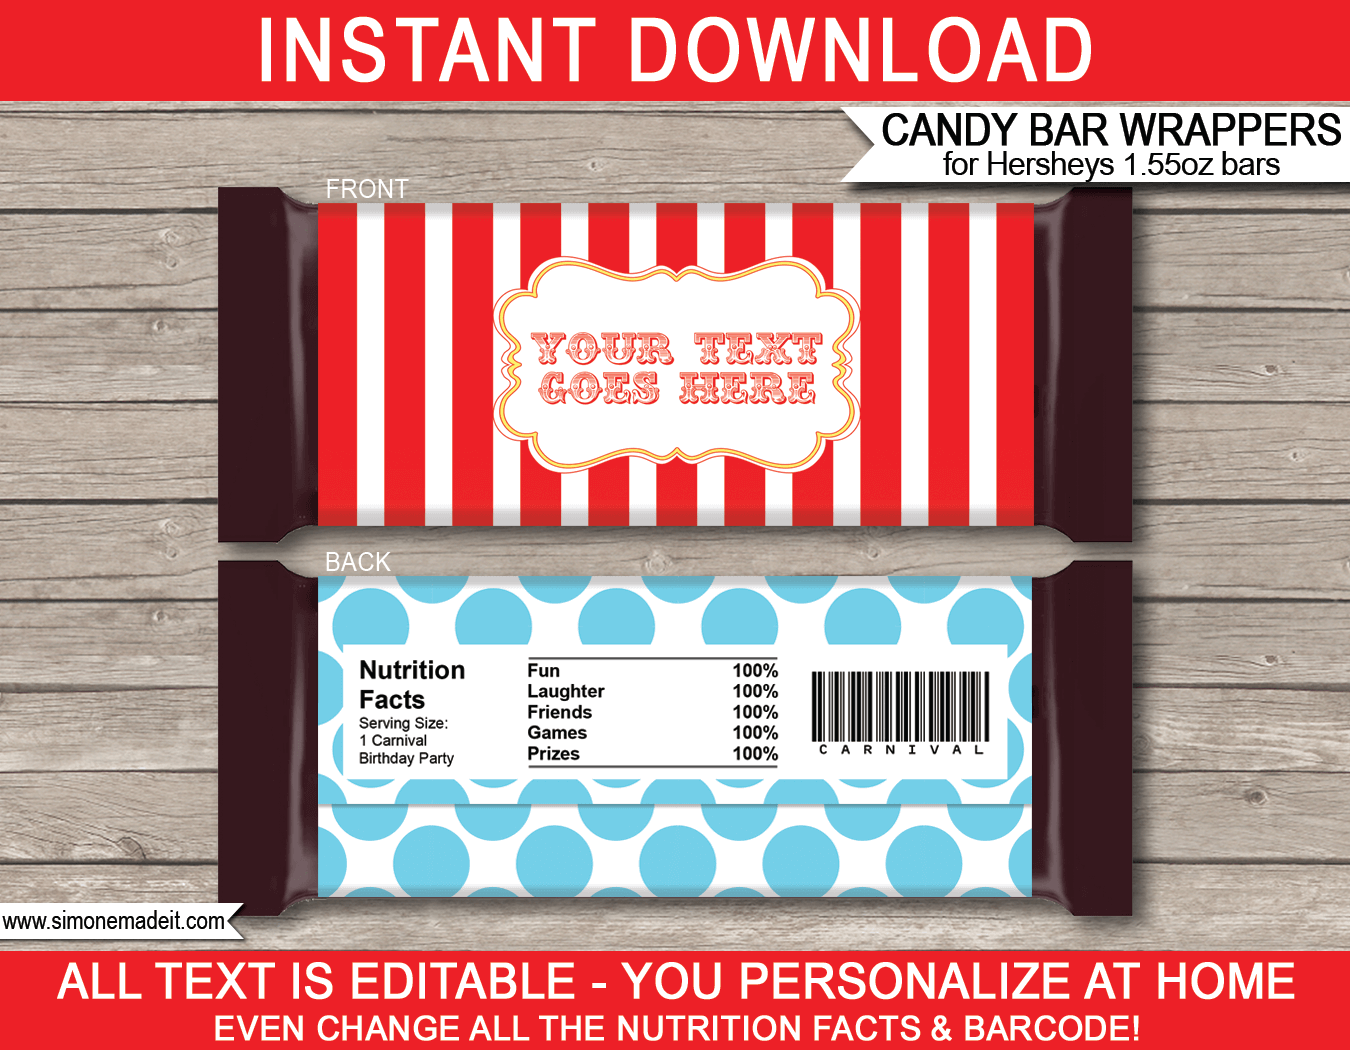 Circus Hershey Candy Bar Wrappers | Carnival | Red Aqua | Birthday Party Favors | Personalized Candy Bars | Editable Template | INSTANT DOWNLOAD $3.00 via simonemadeit.com